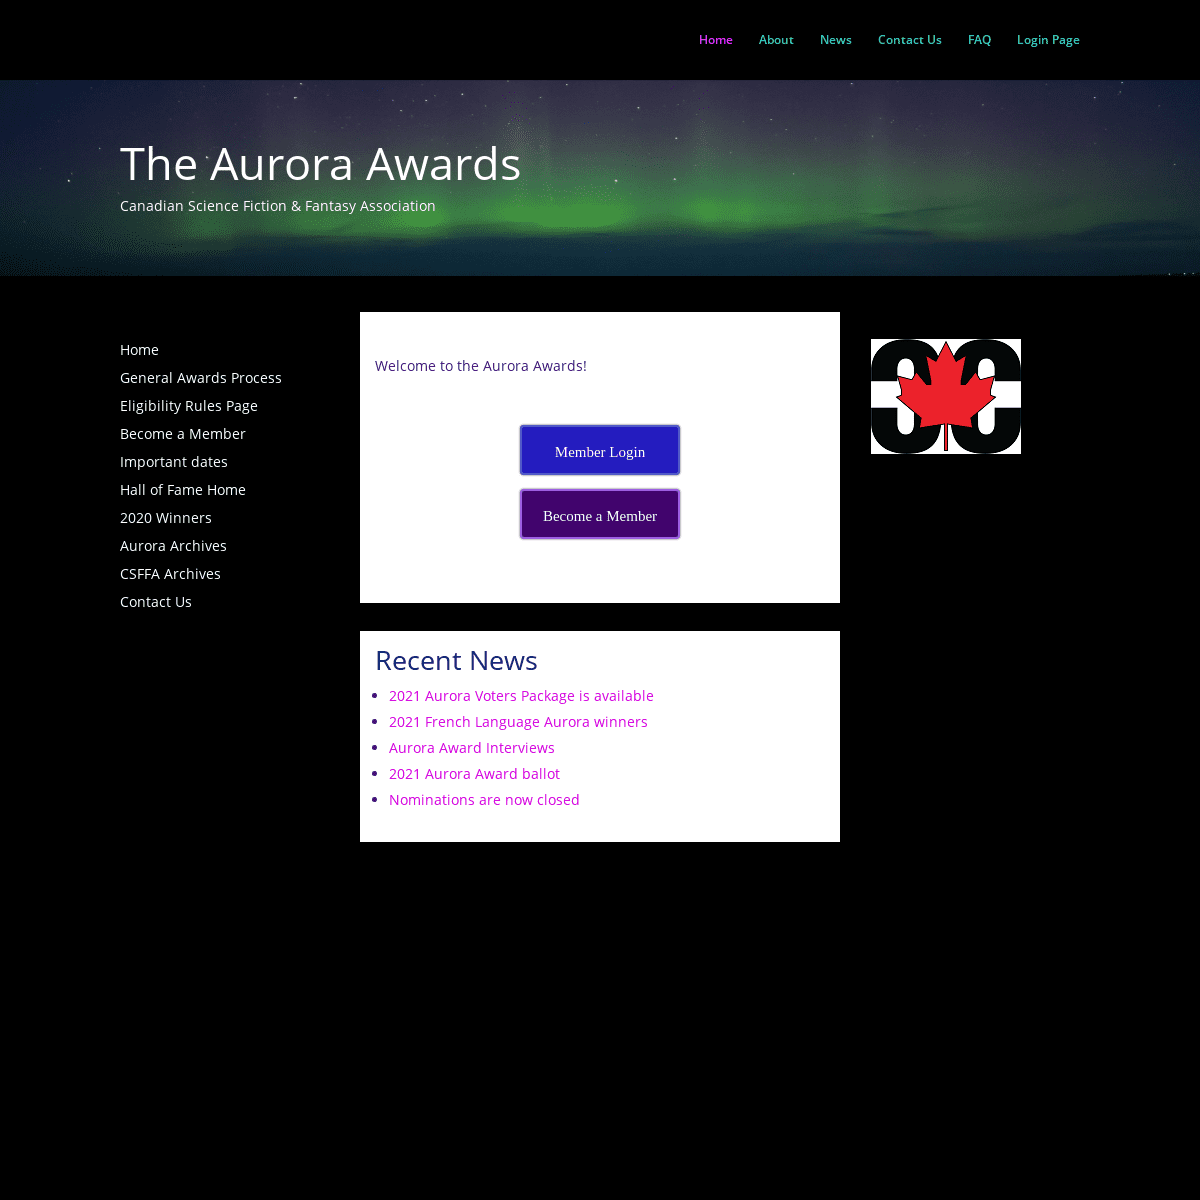 A complete backup of https://prixaurorawards.ca